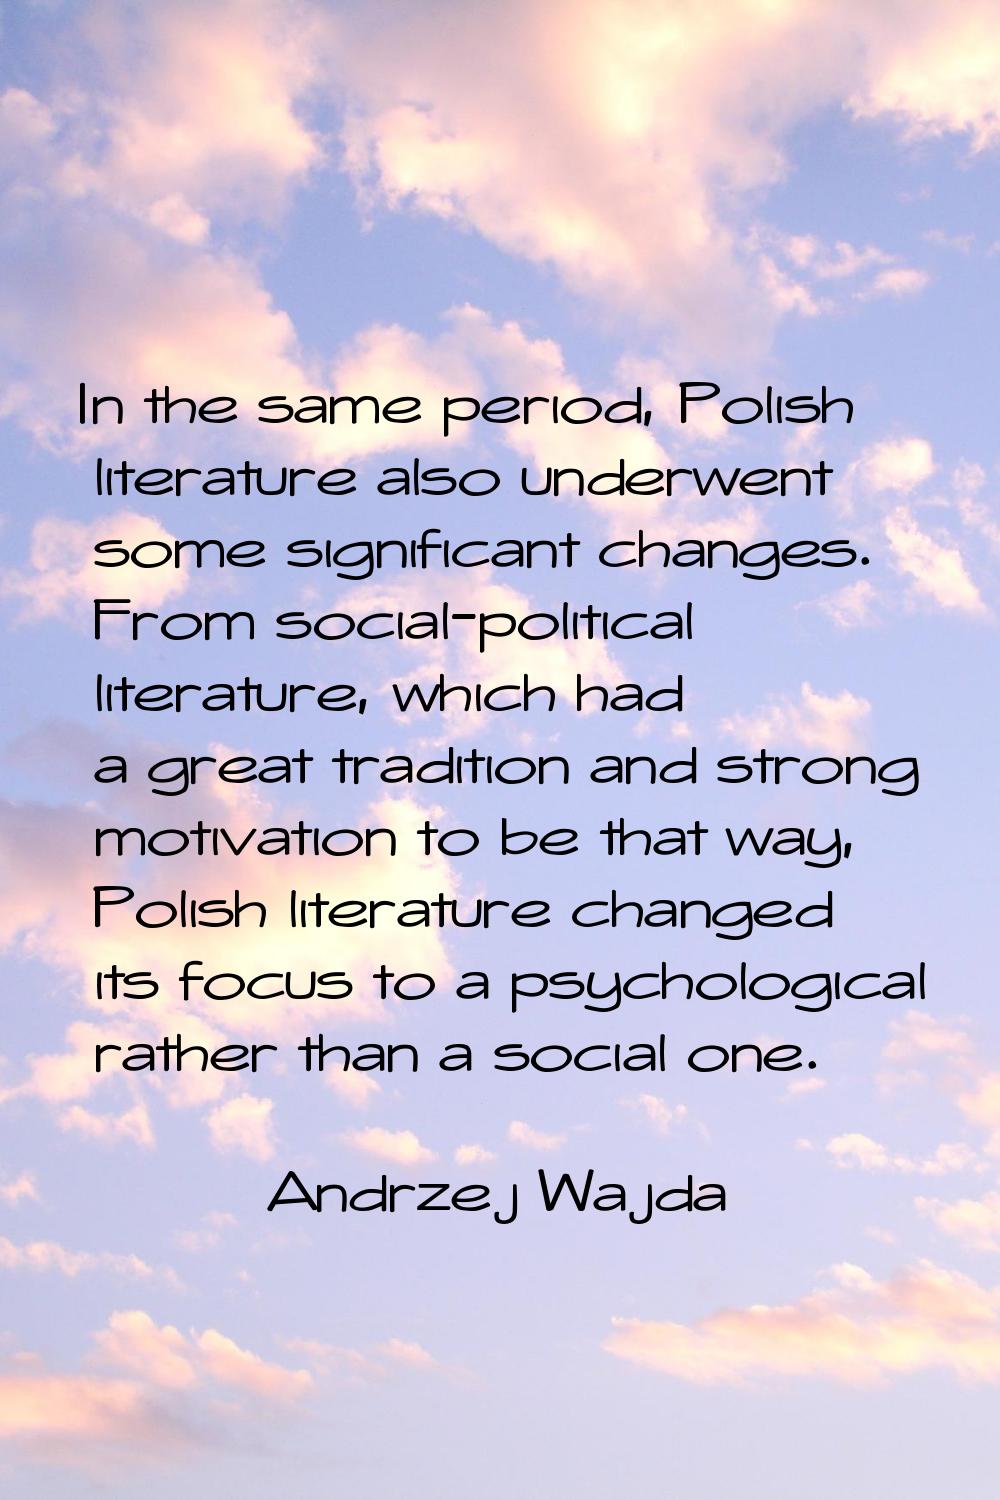 In the same period, Polish literature also underwent some significant changes. From social-politica